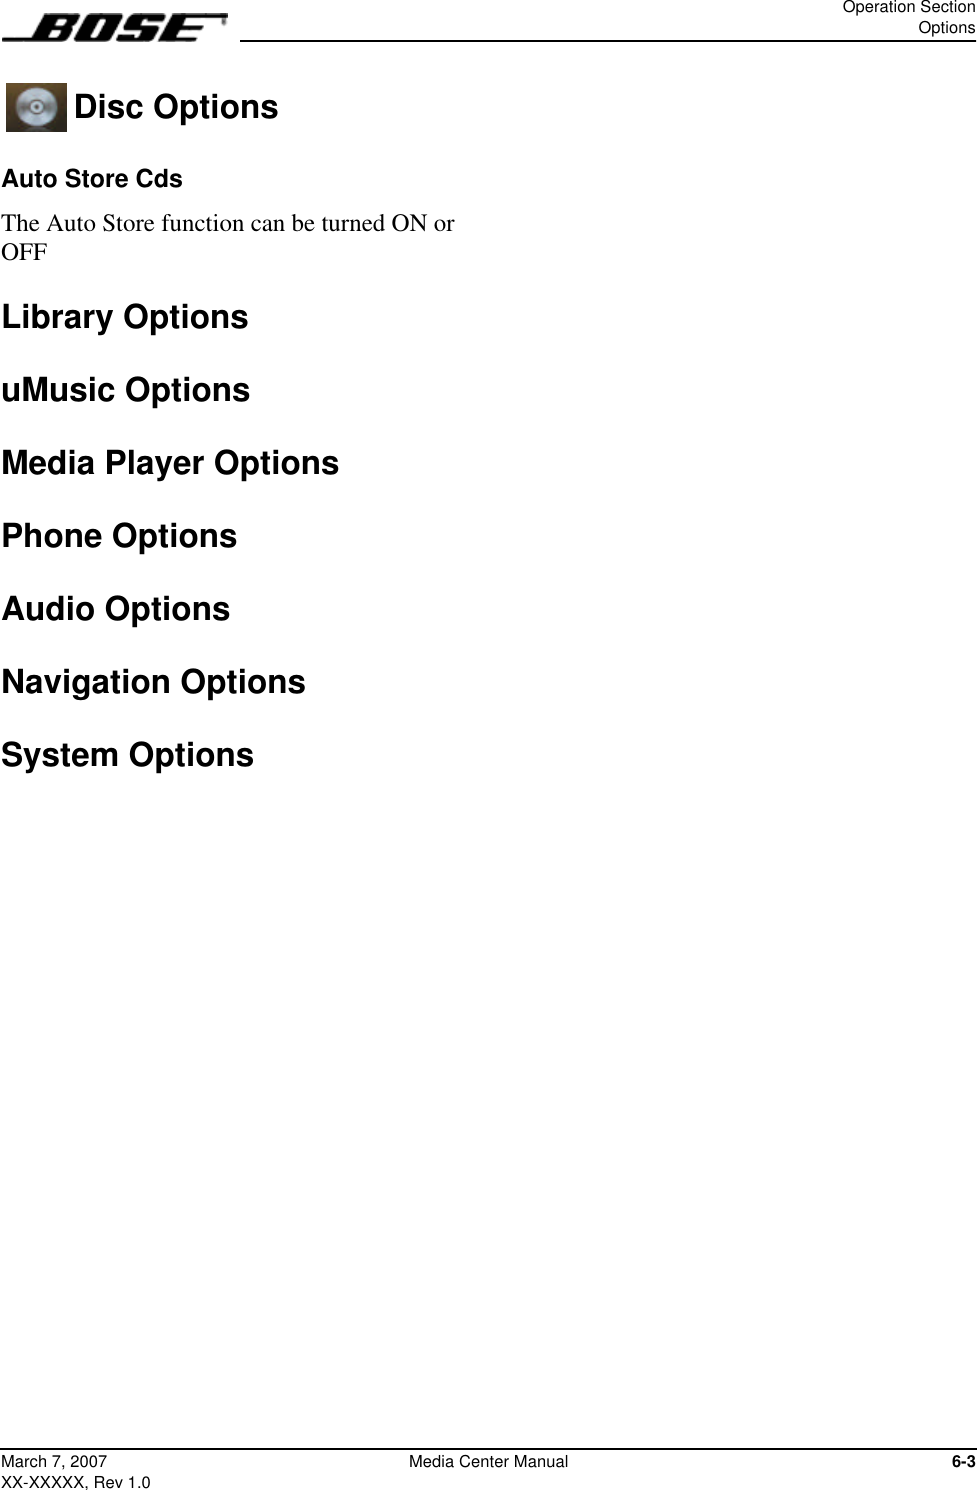 Operation SectionOptions6-3March 7, 2007XX-XXXXX, Rev 1.0Media Center Manual Disc OptionsAuto Store CdsThe Auto Store function can be turned ON or OFFLibrary OptionsuMusic OptionsMedia Player OptionsPhone OptionsAudio OptionsNavigation OptionsSystem Options